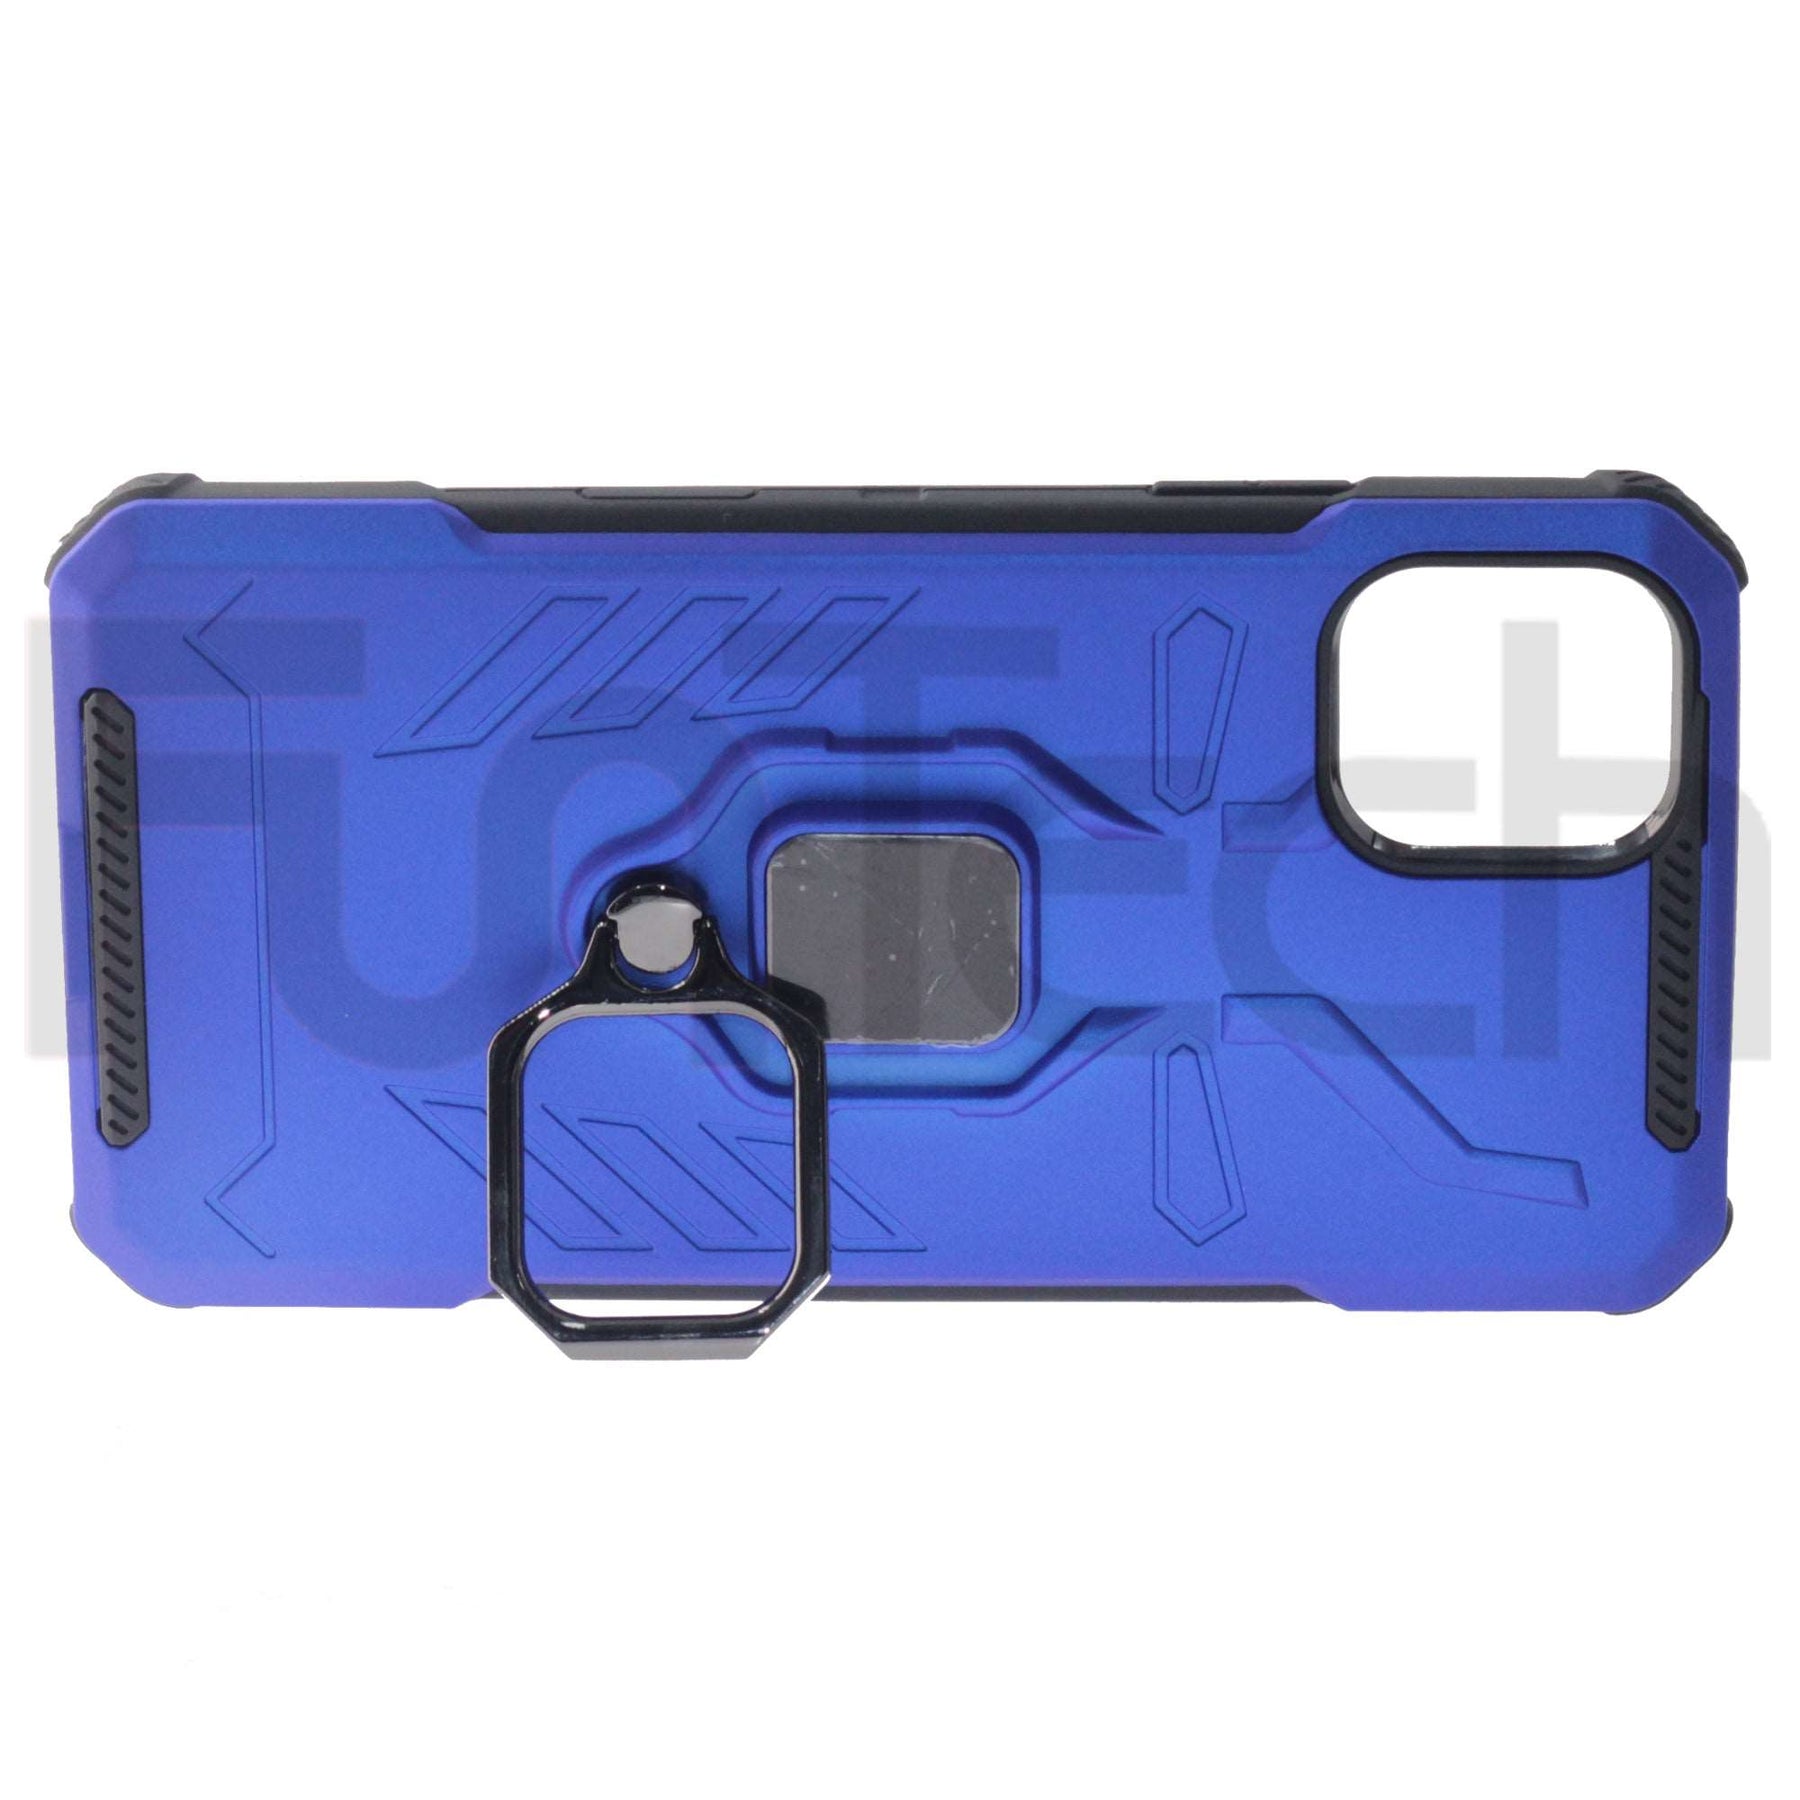 Apple iPhone 11, Ring Armor Phone Case, Color Blue.